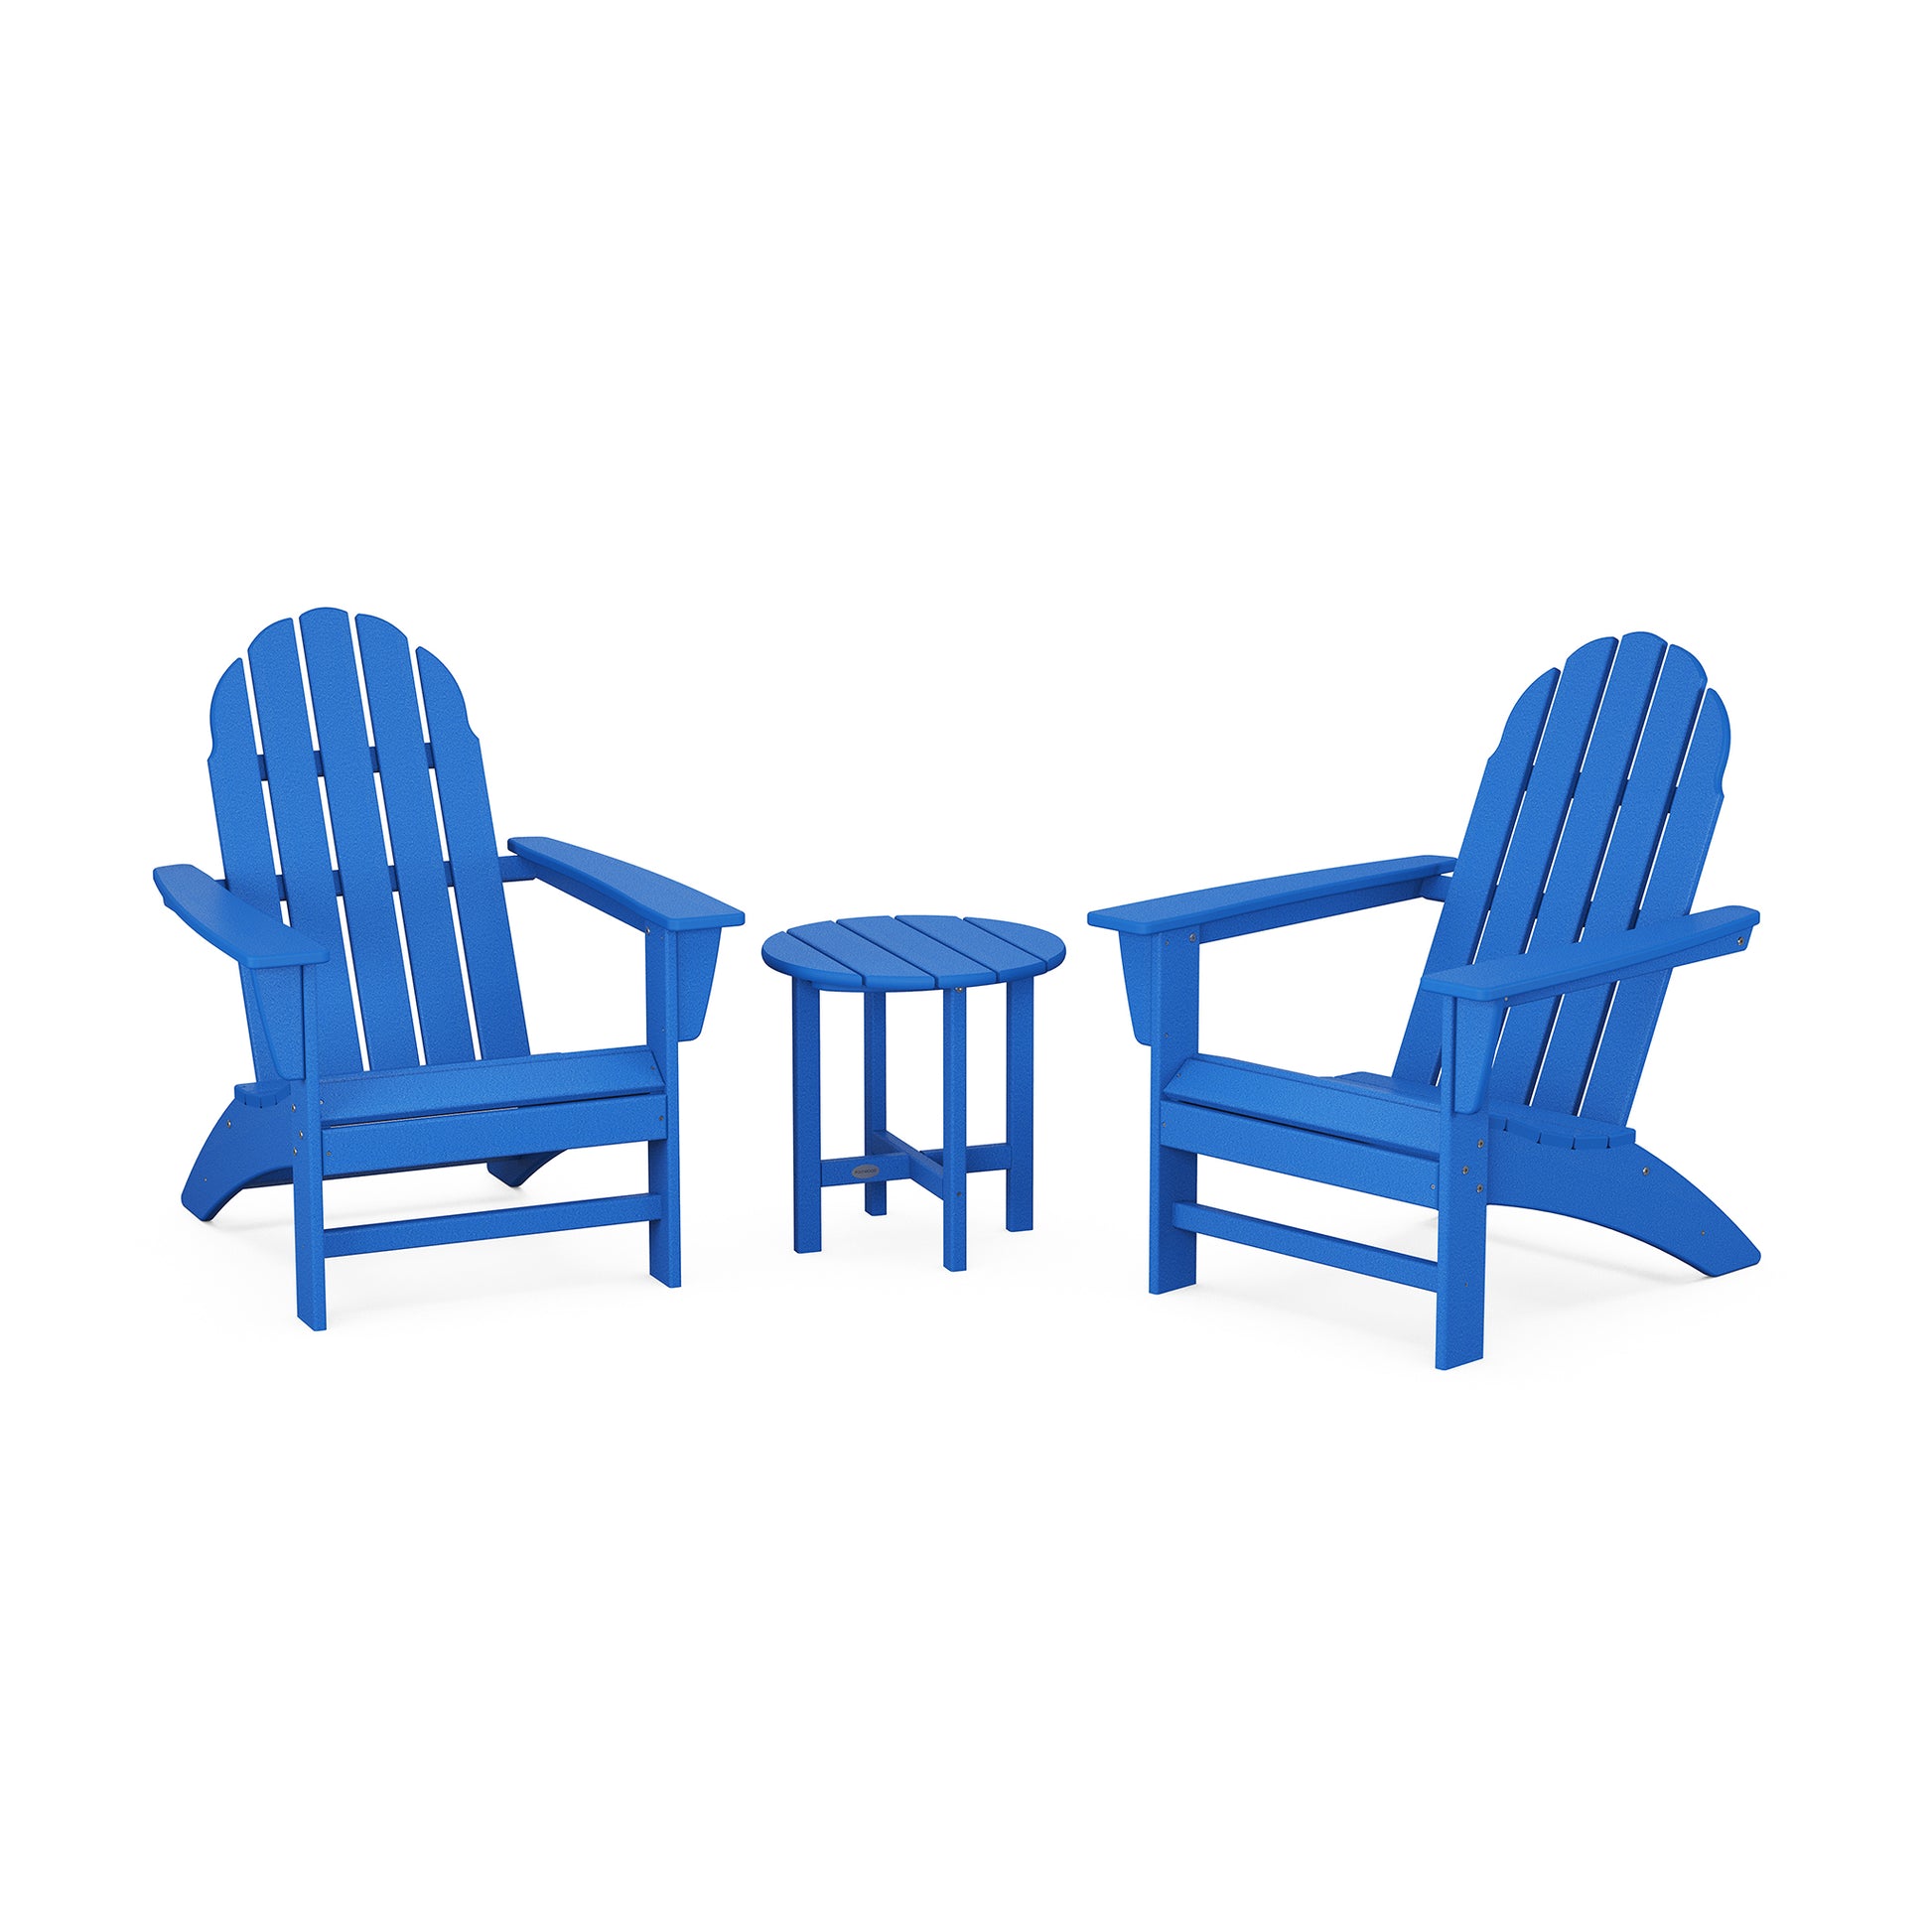 Two blue POLYWOOD Vineyard Adirondack chairs facing each other with a small matching side table between them, all set against a plain white background.